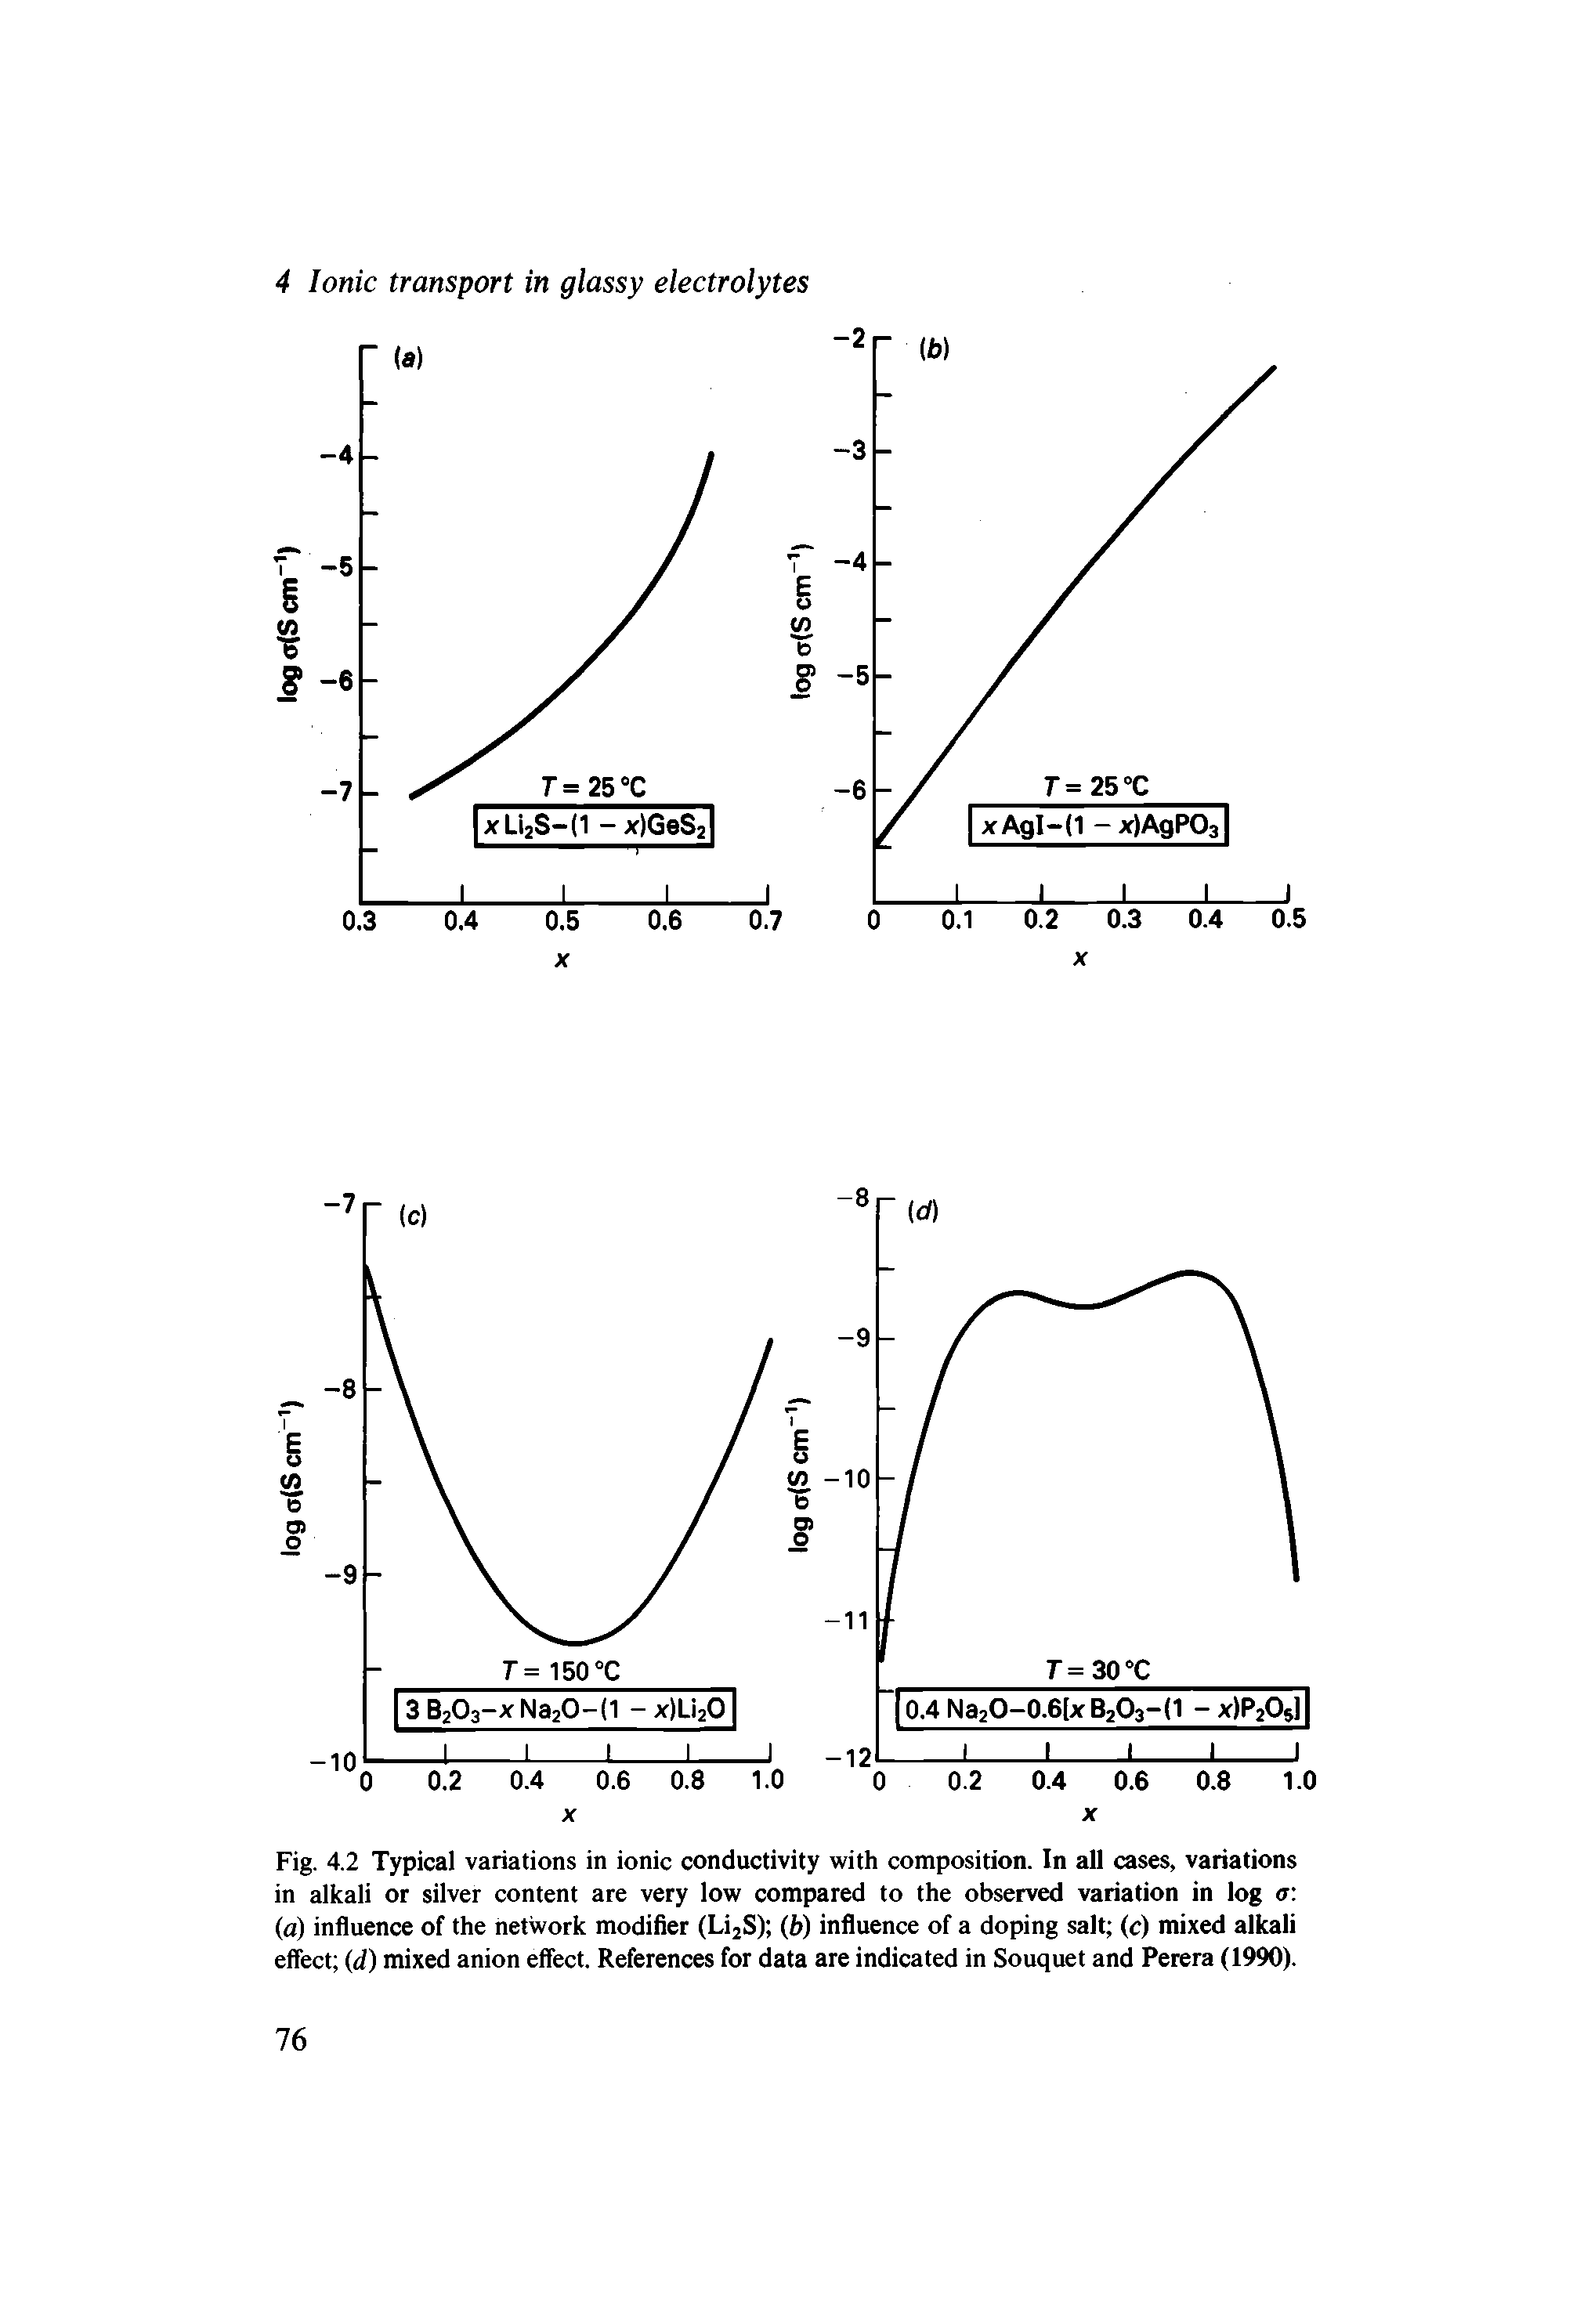 Fig. 4.2 Typical variations in ionic conductivity with composition. In all cases, variations in alkali or silver content are very low compared to the observed variation in log a (a) influence of the network modifier (LijS) (b) influence of a doping salt (c) mixed alkali effect (d) mixed anion effect. References for data are indicated in Souquet and Perera (1990).